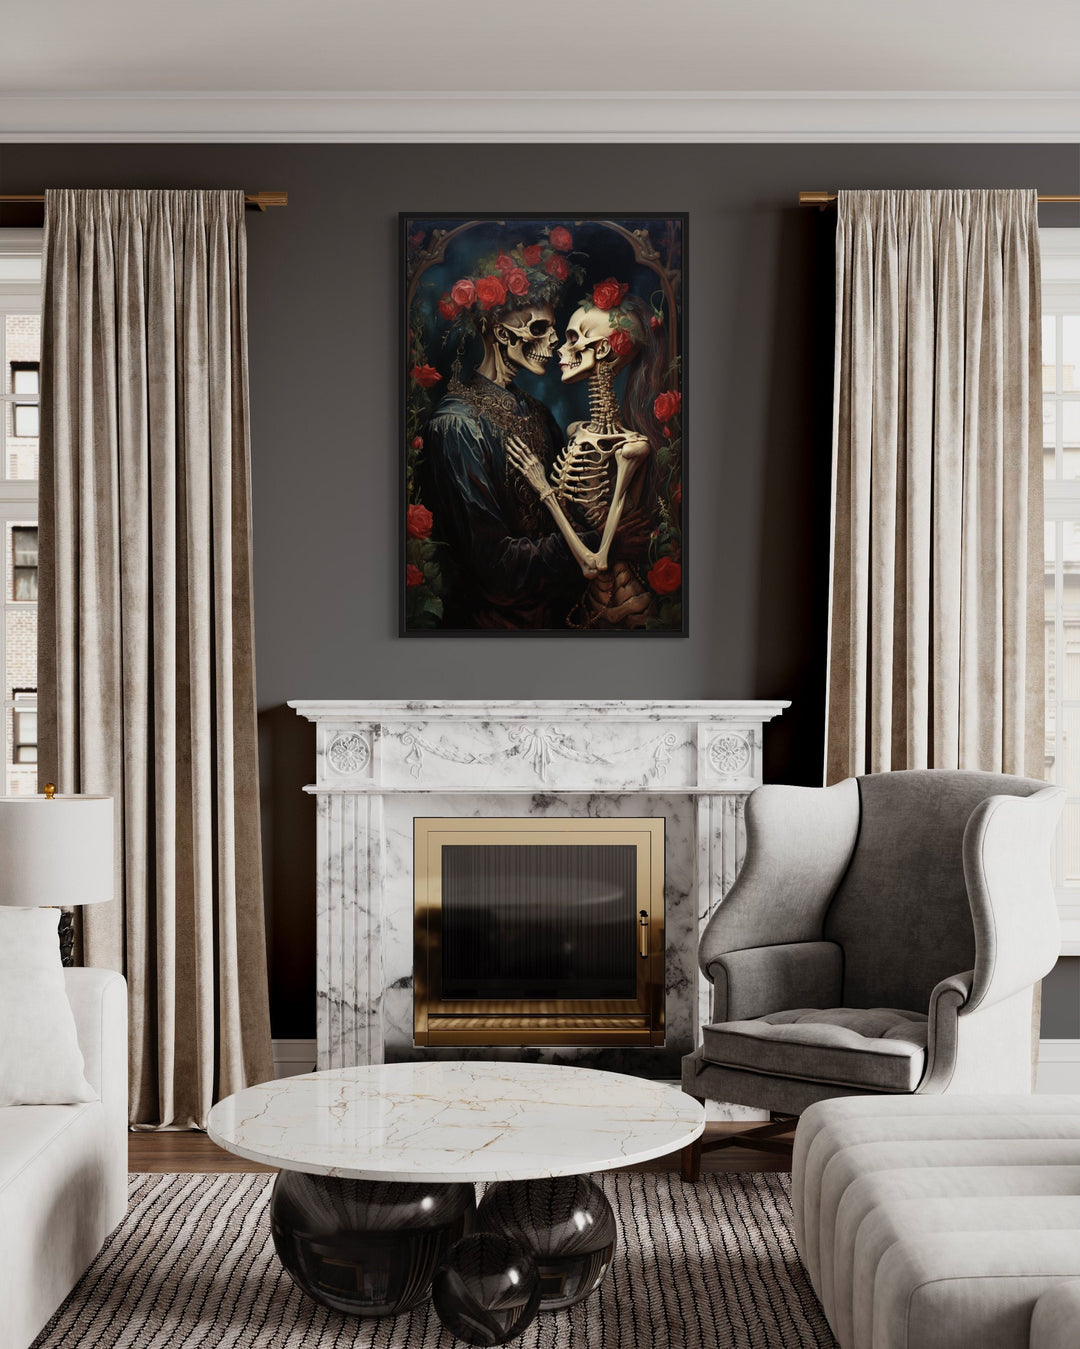 Skeleton Lovers In Flowers Romantic Wall Ar above fireplace